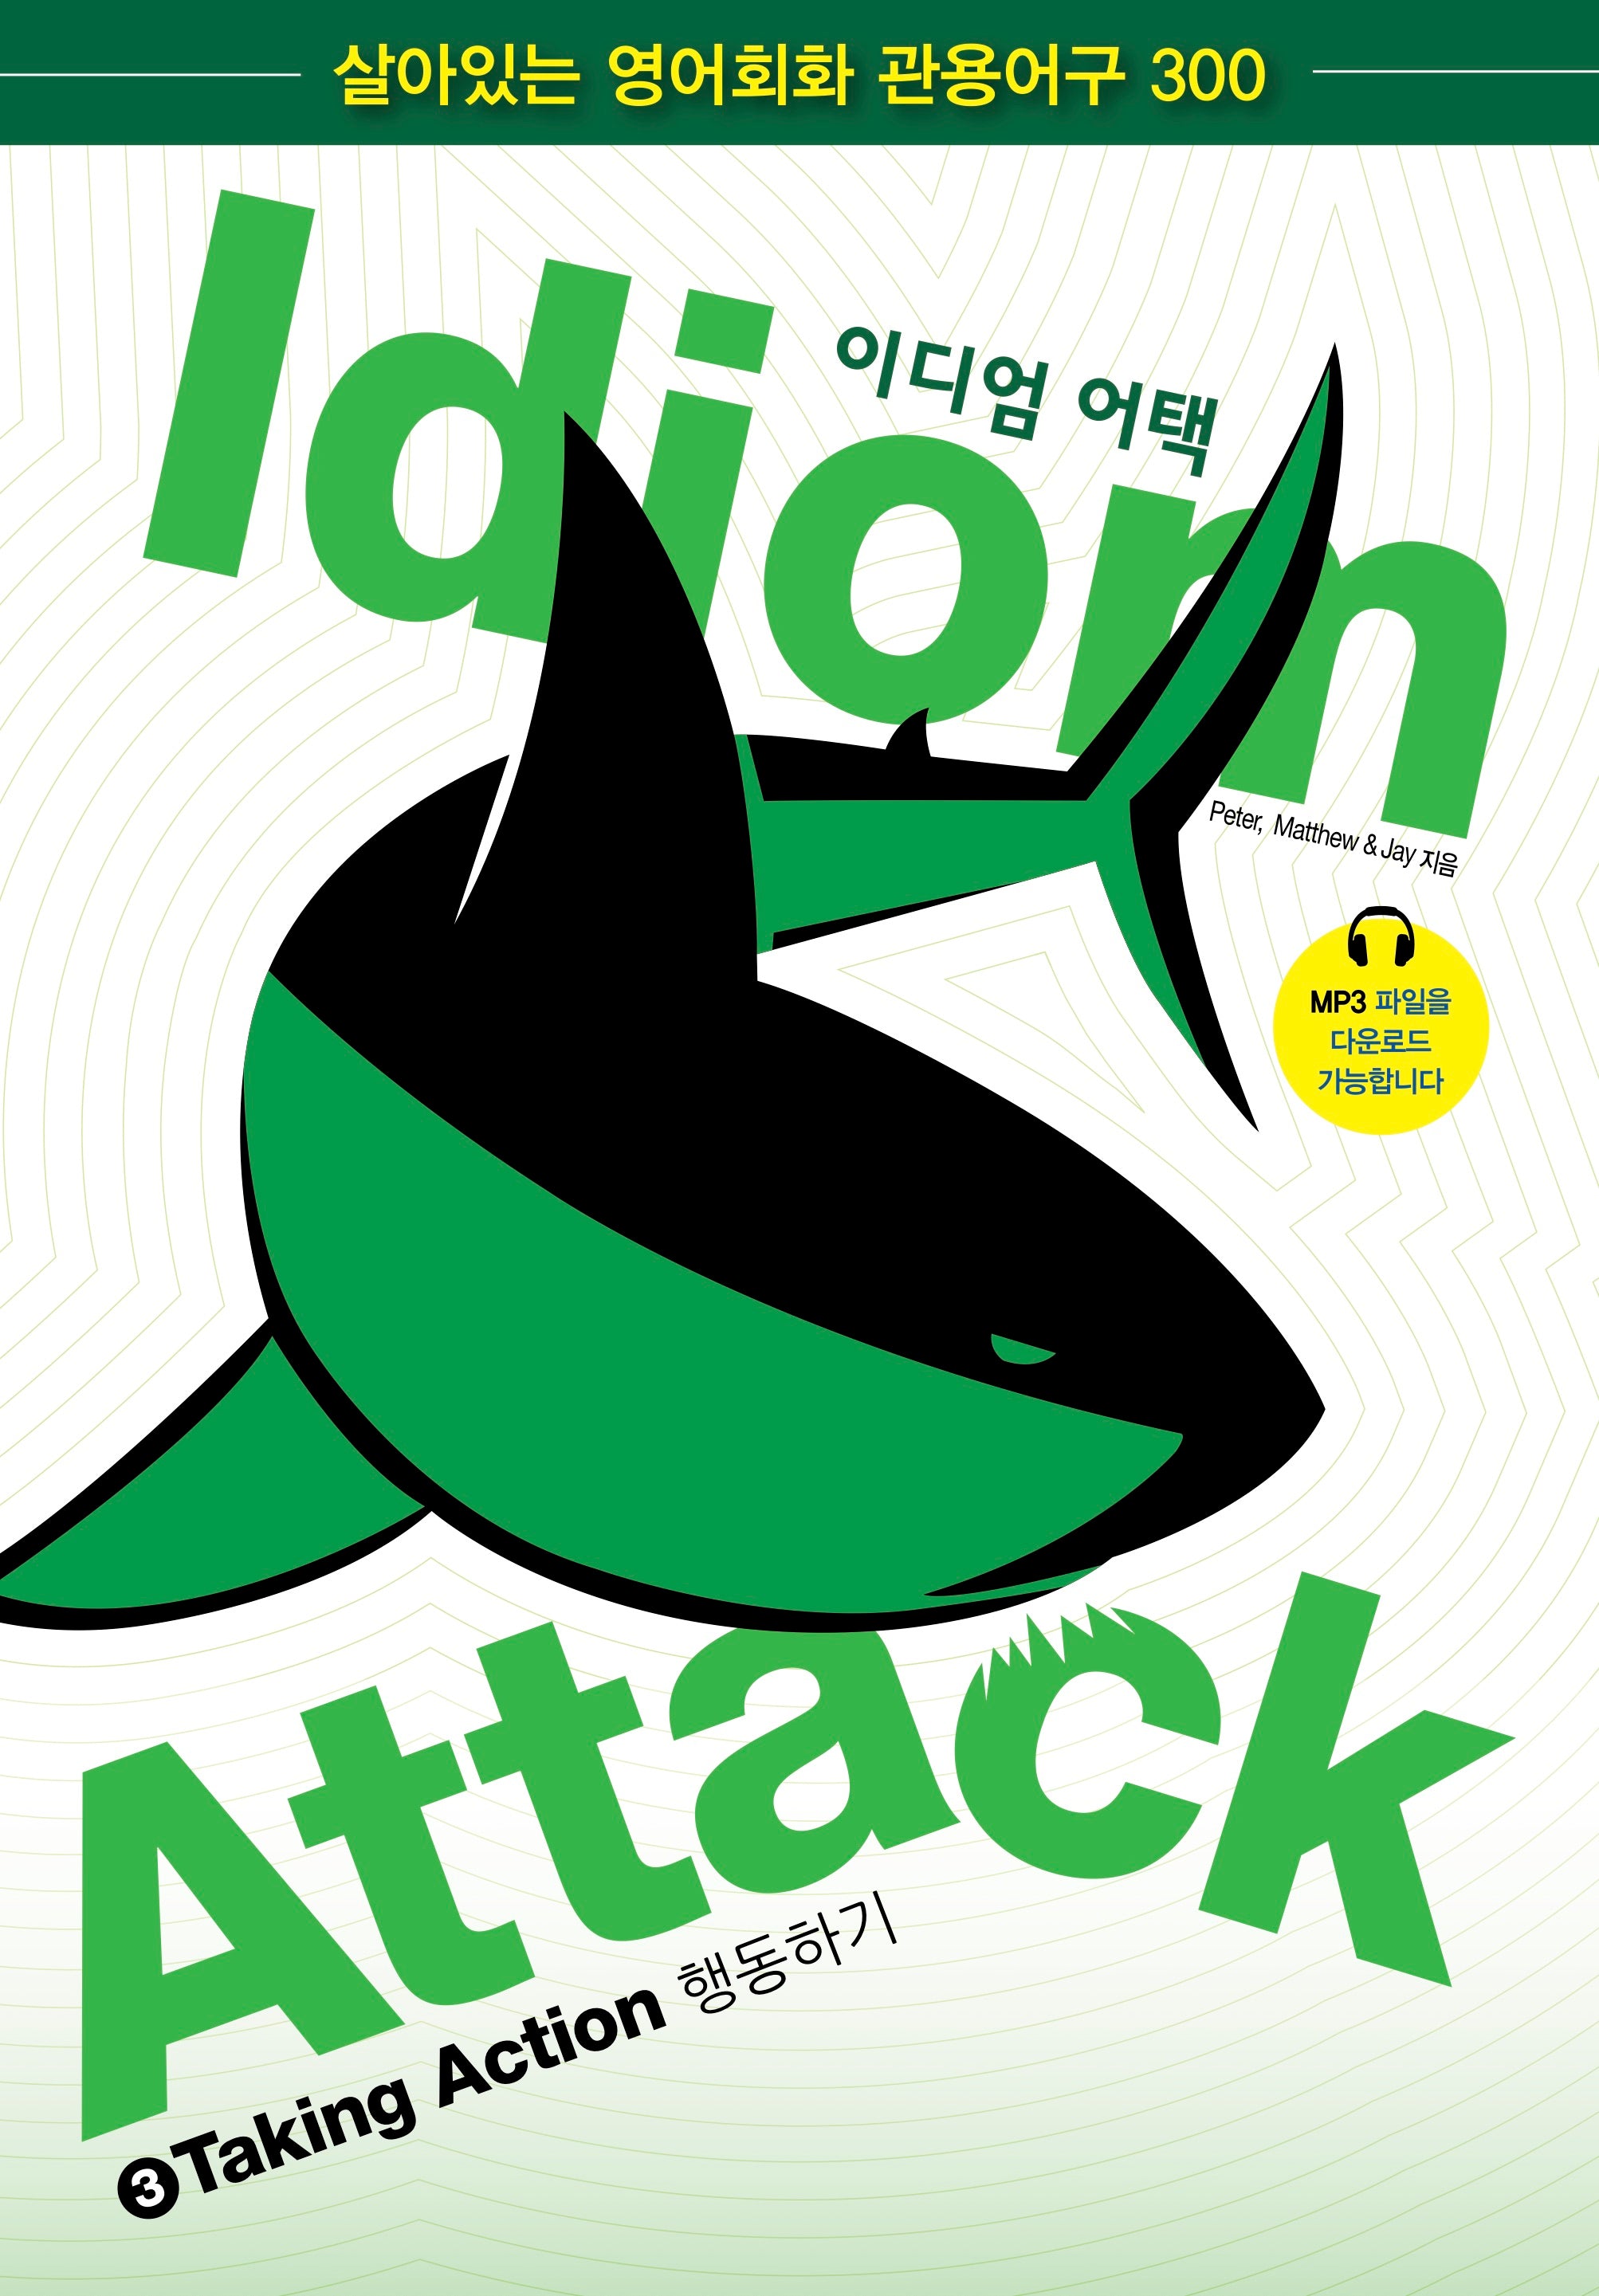 Idiom Attack Vol. 3 - Taking Action (Korean Edition):  이디엄 어택 3 - 행동하기 : English Idioms for ESL Learners: With 300+ Idioms in 25 Themed Chapters w/ free MP3 at IdiomAttack.com